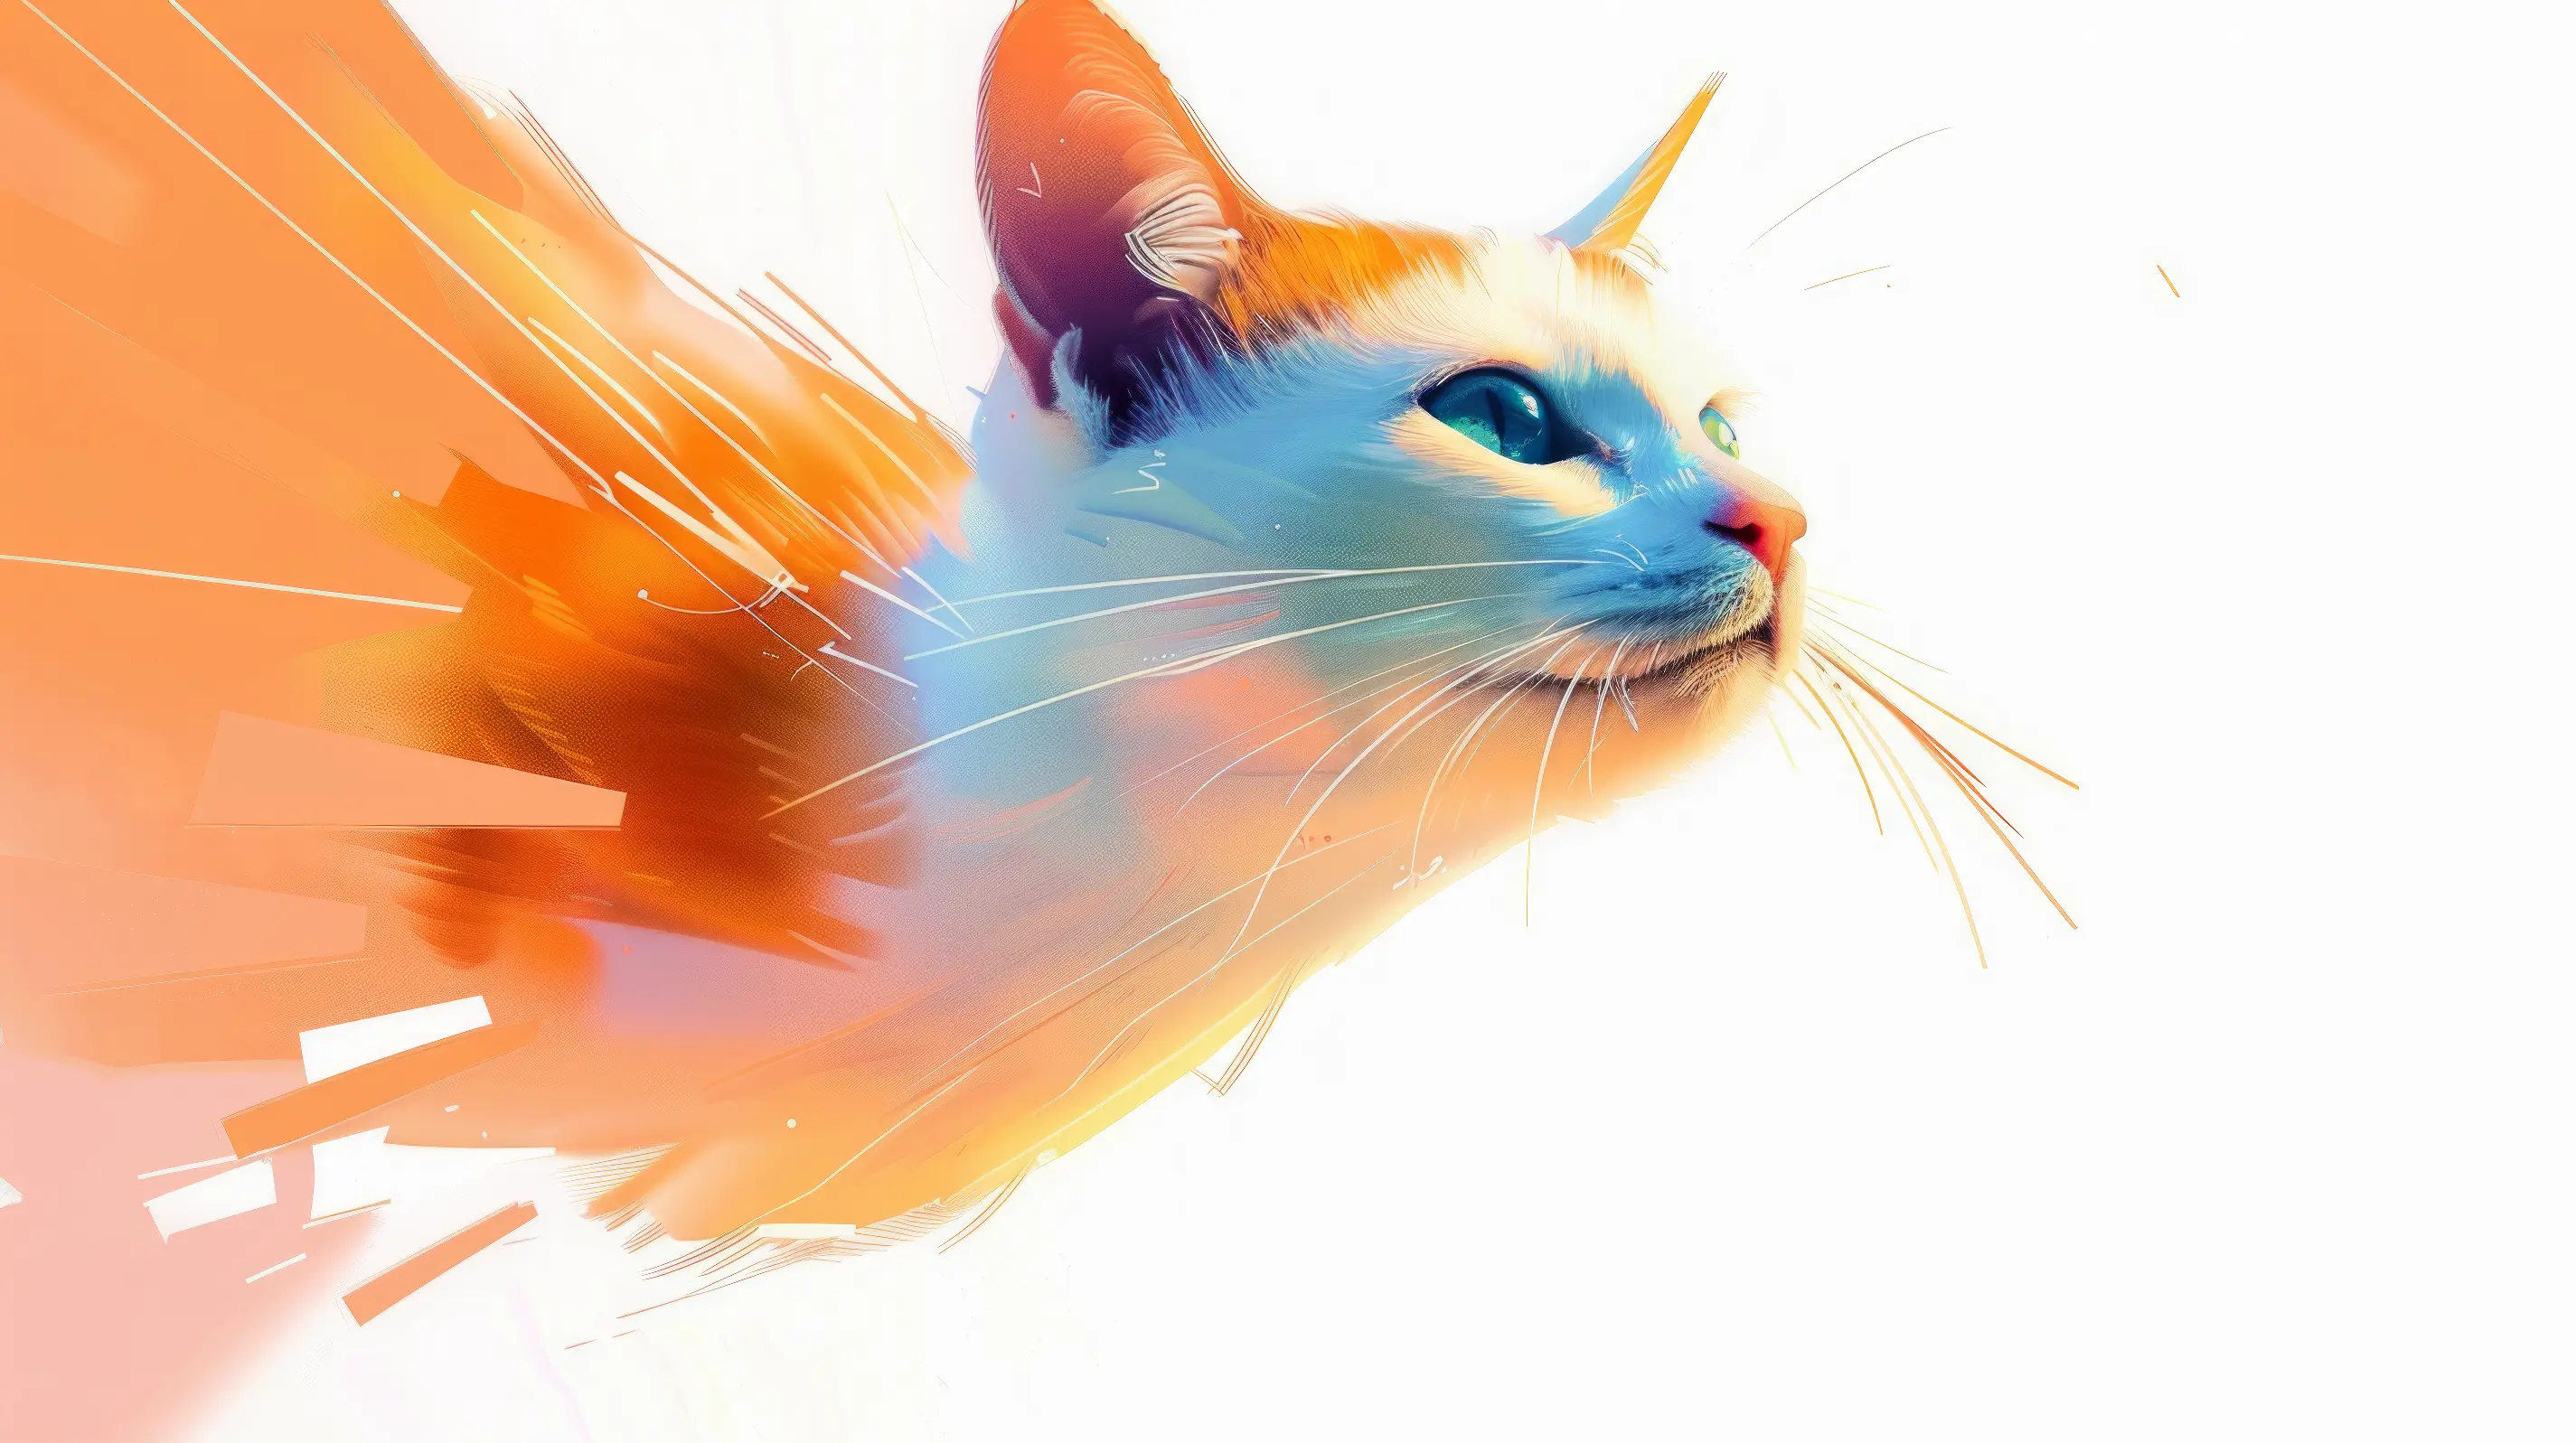 Image of Colourful, abstract digital art of a cat